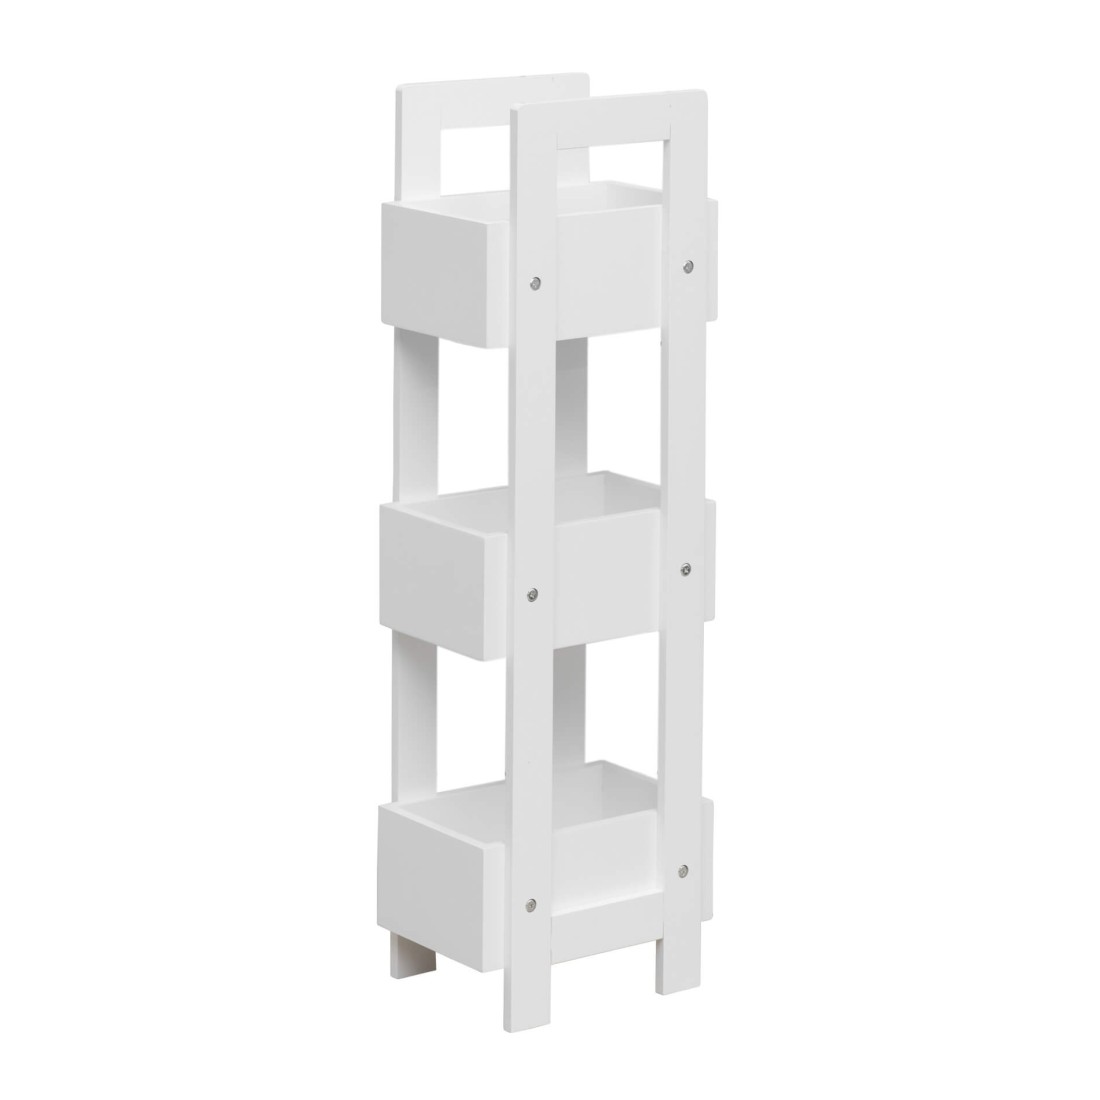 Papalot - Tall and narrow freestanding shelf for bathroom or kitchen